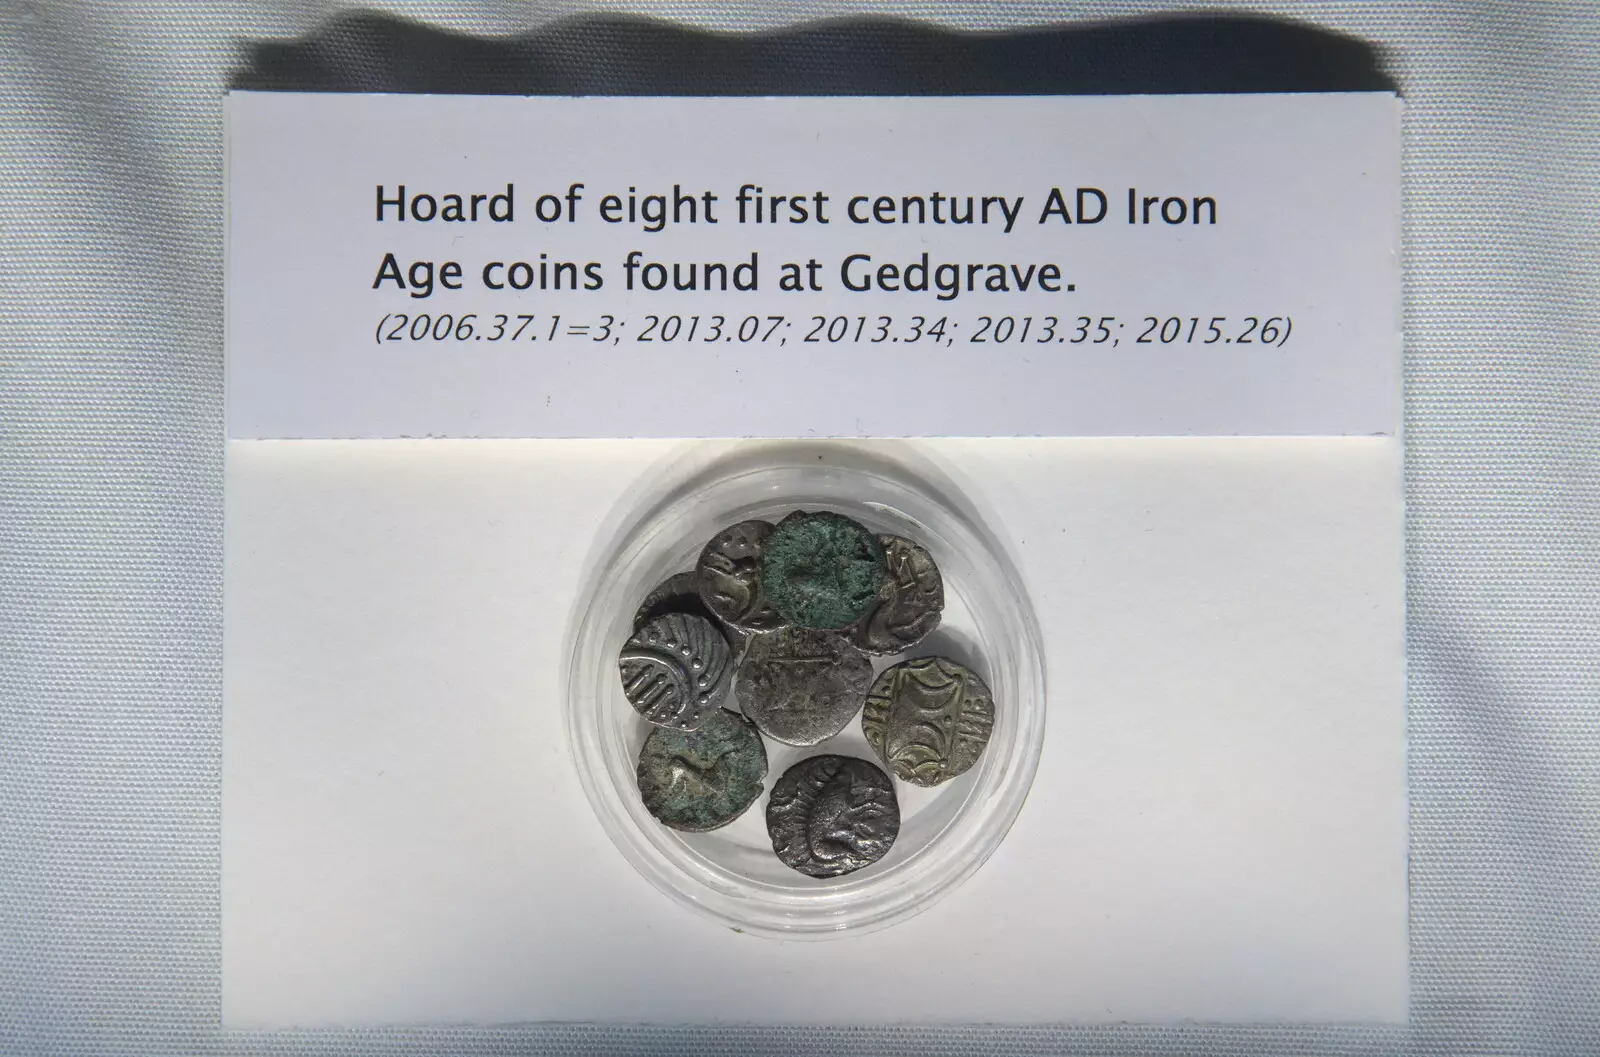 Some local Roman coins in the museum, from A Trip to Orford Castle, Orford, Suffolk - 26th February 2022